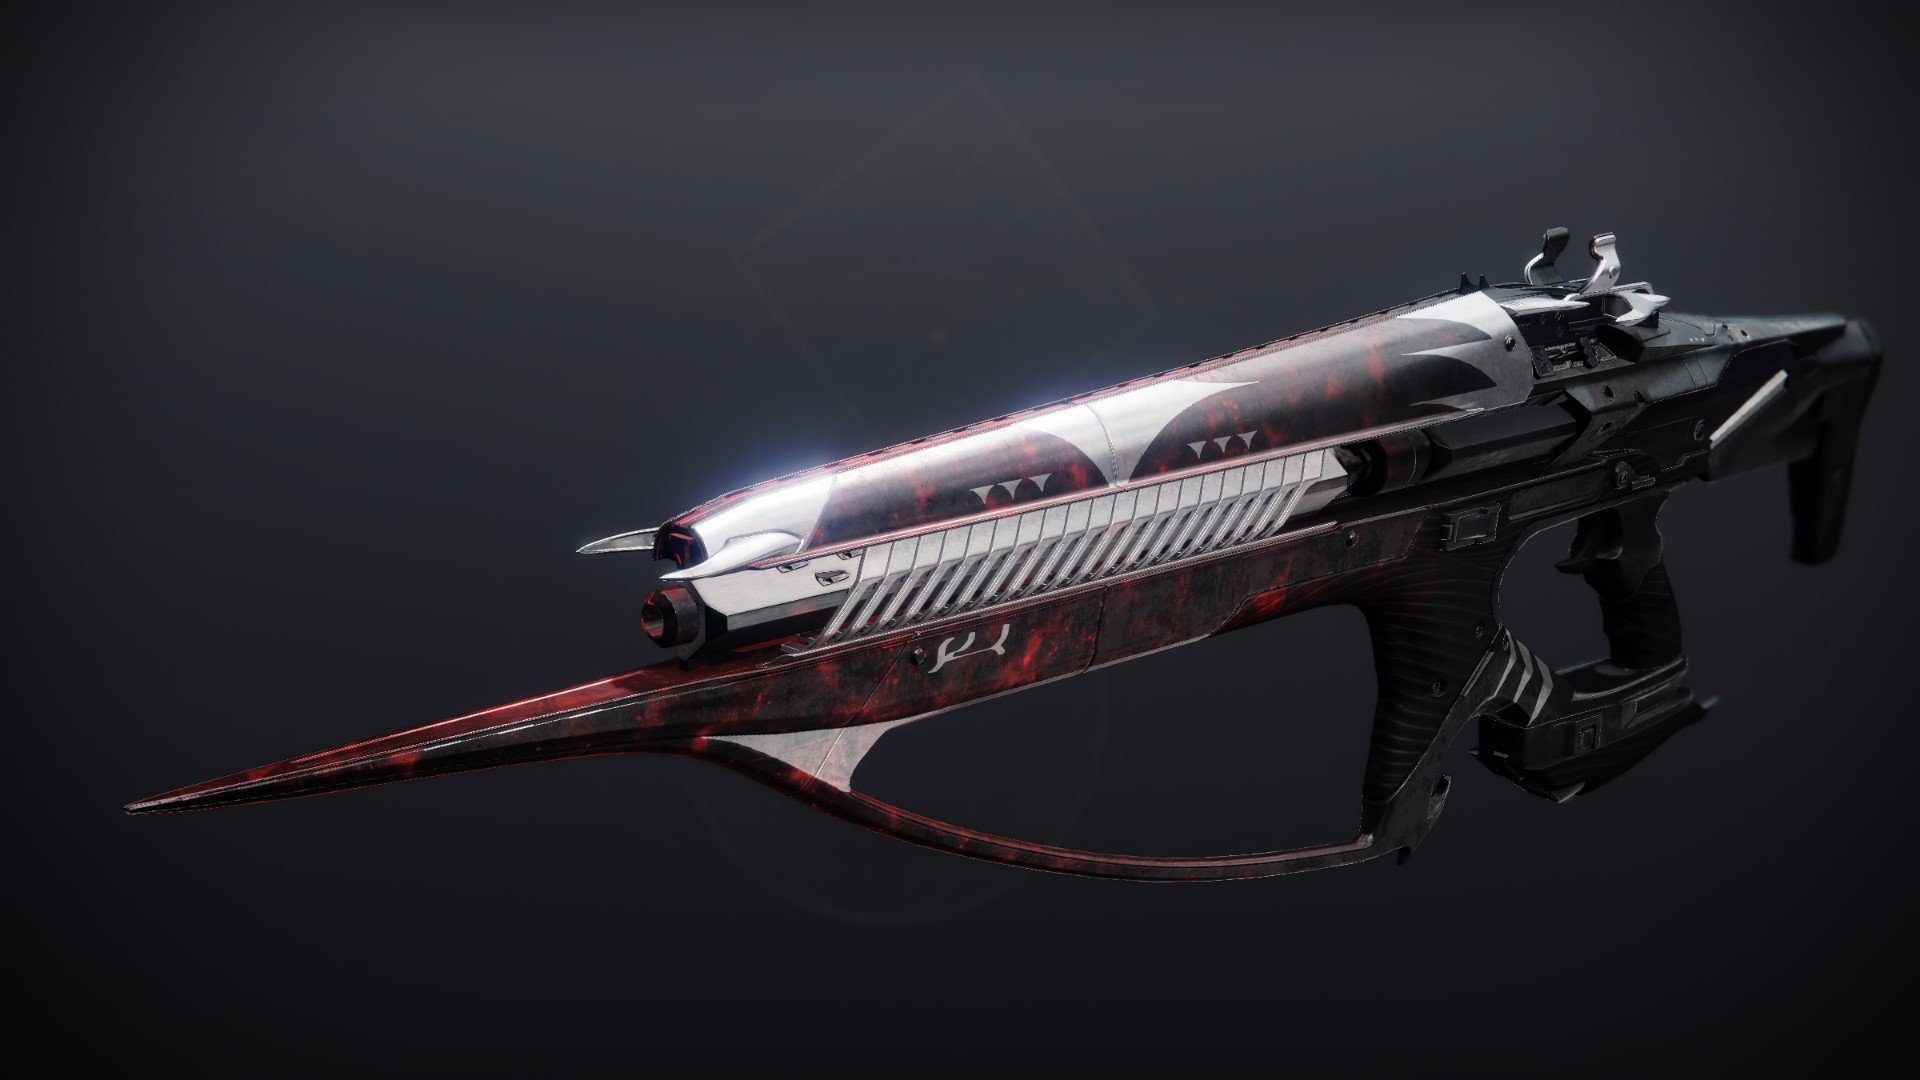 Stormchaser - Destiny 2 Legendary Linear Fusion Rifle - Possible